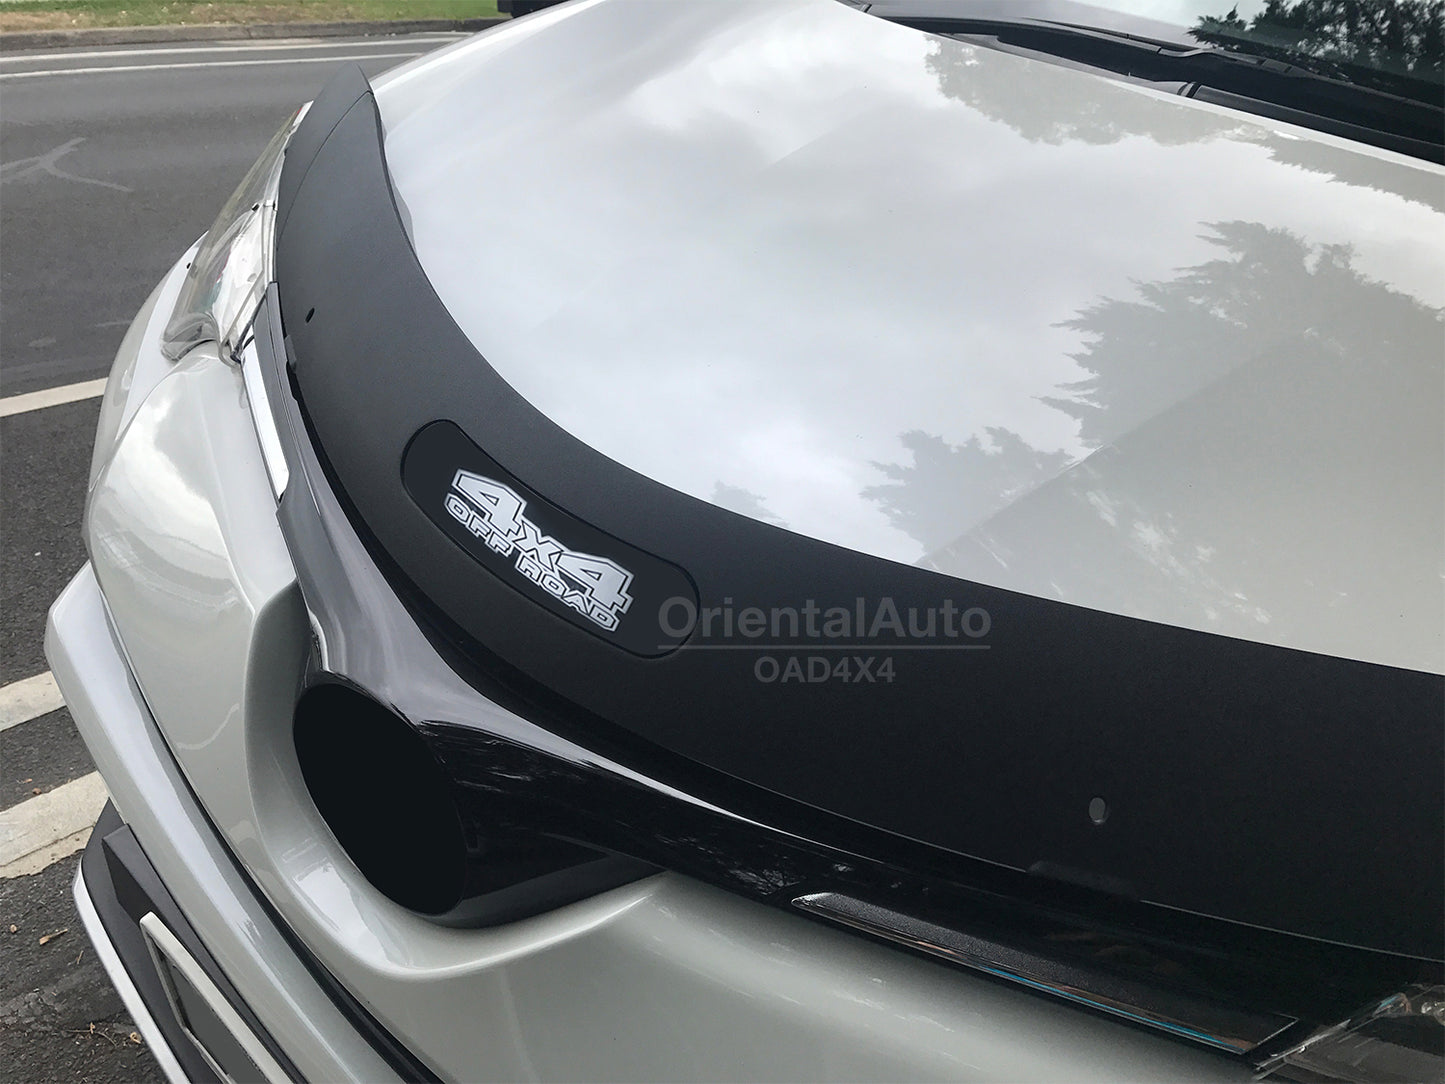 Injection Modeling Exclusive Bonnet Protector for Toyota RAV4 2013-2019 Hood Protector Bonnet Guard